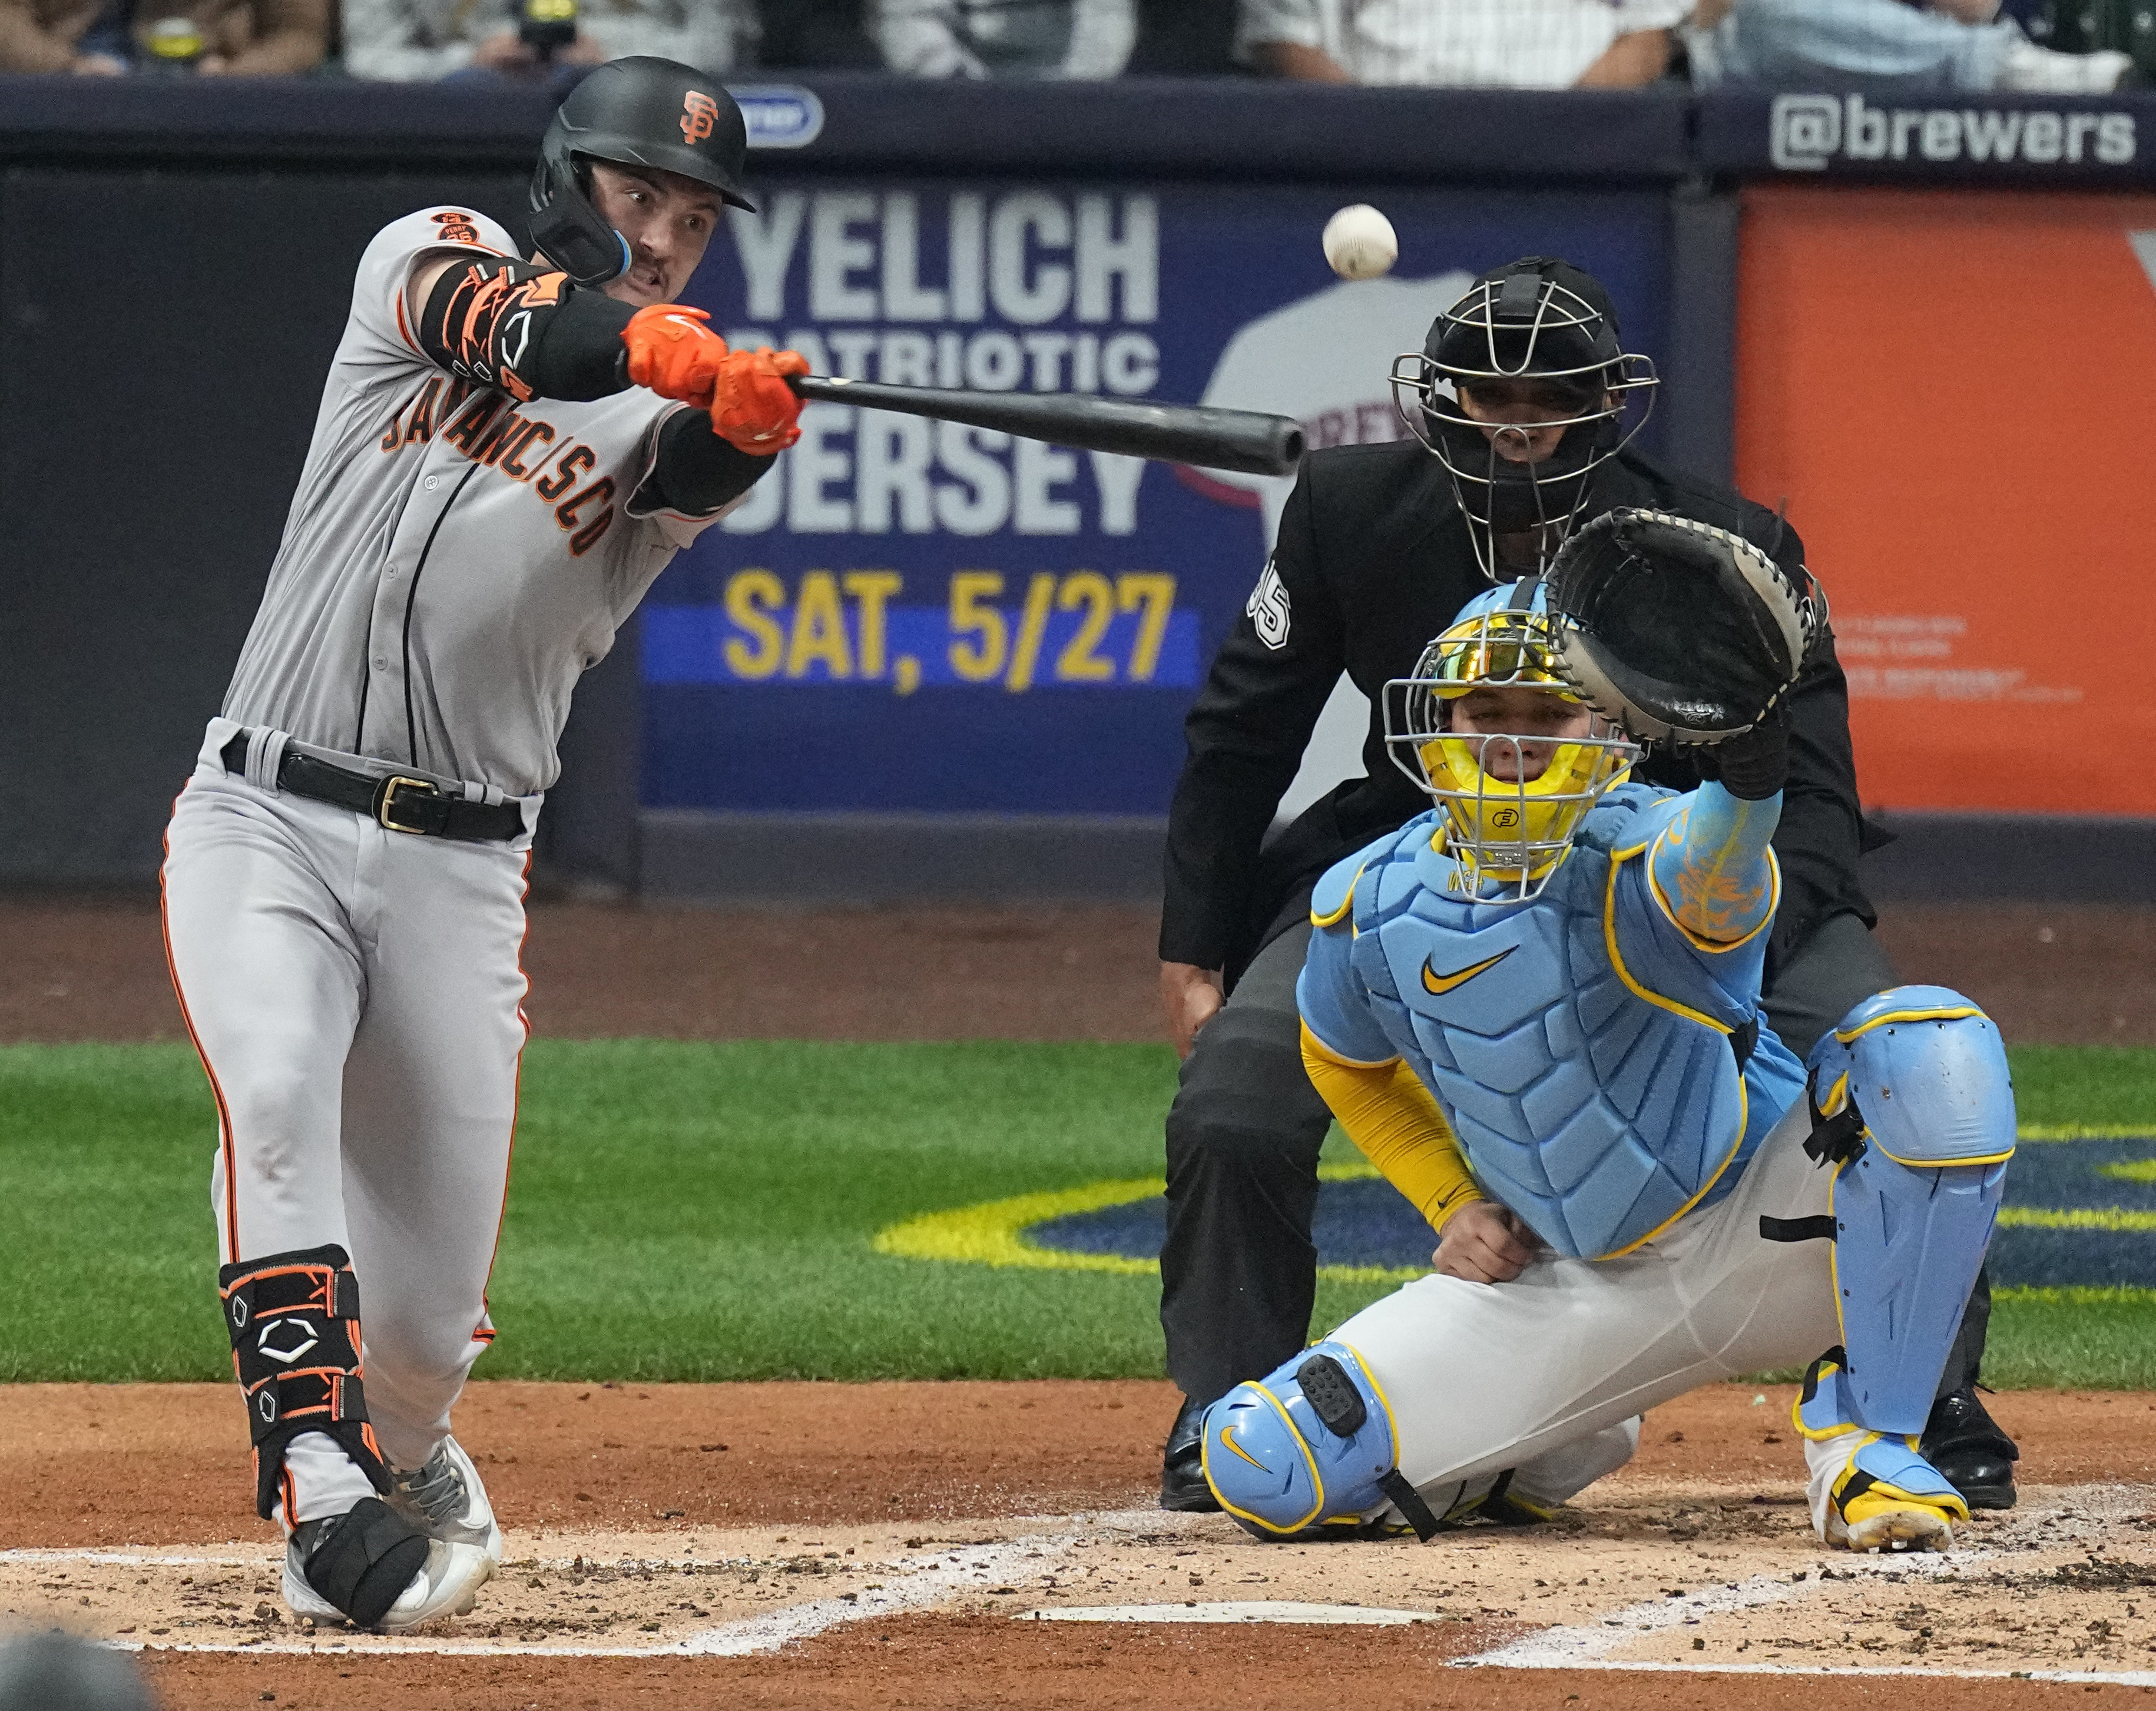 Michael Conforto goes 4 for 4 with a homer, Giants use six pitchers to  blank Brewers 5-0 - Washington Times